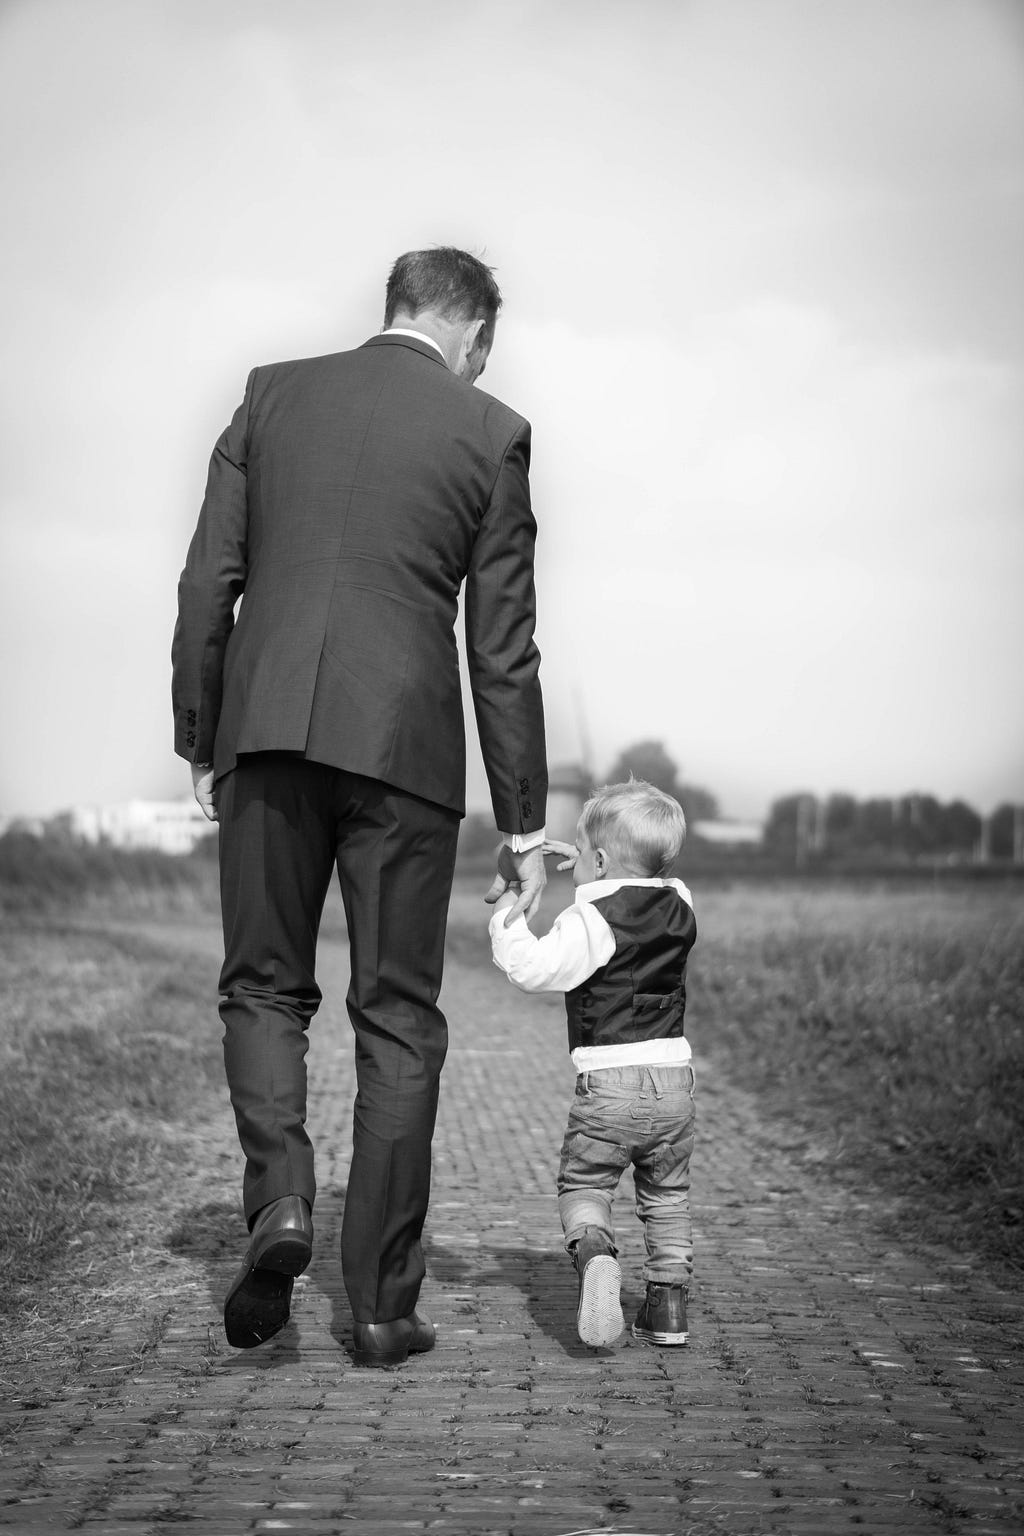 An adult man, wearing a suit, is seen walking down a path, away from the camera. His right hand is reaching downwards, to let the toddler to his right grab hold of it and walk with him.